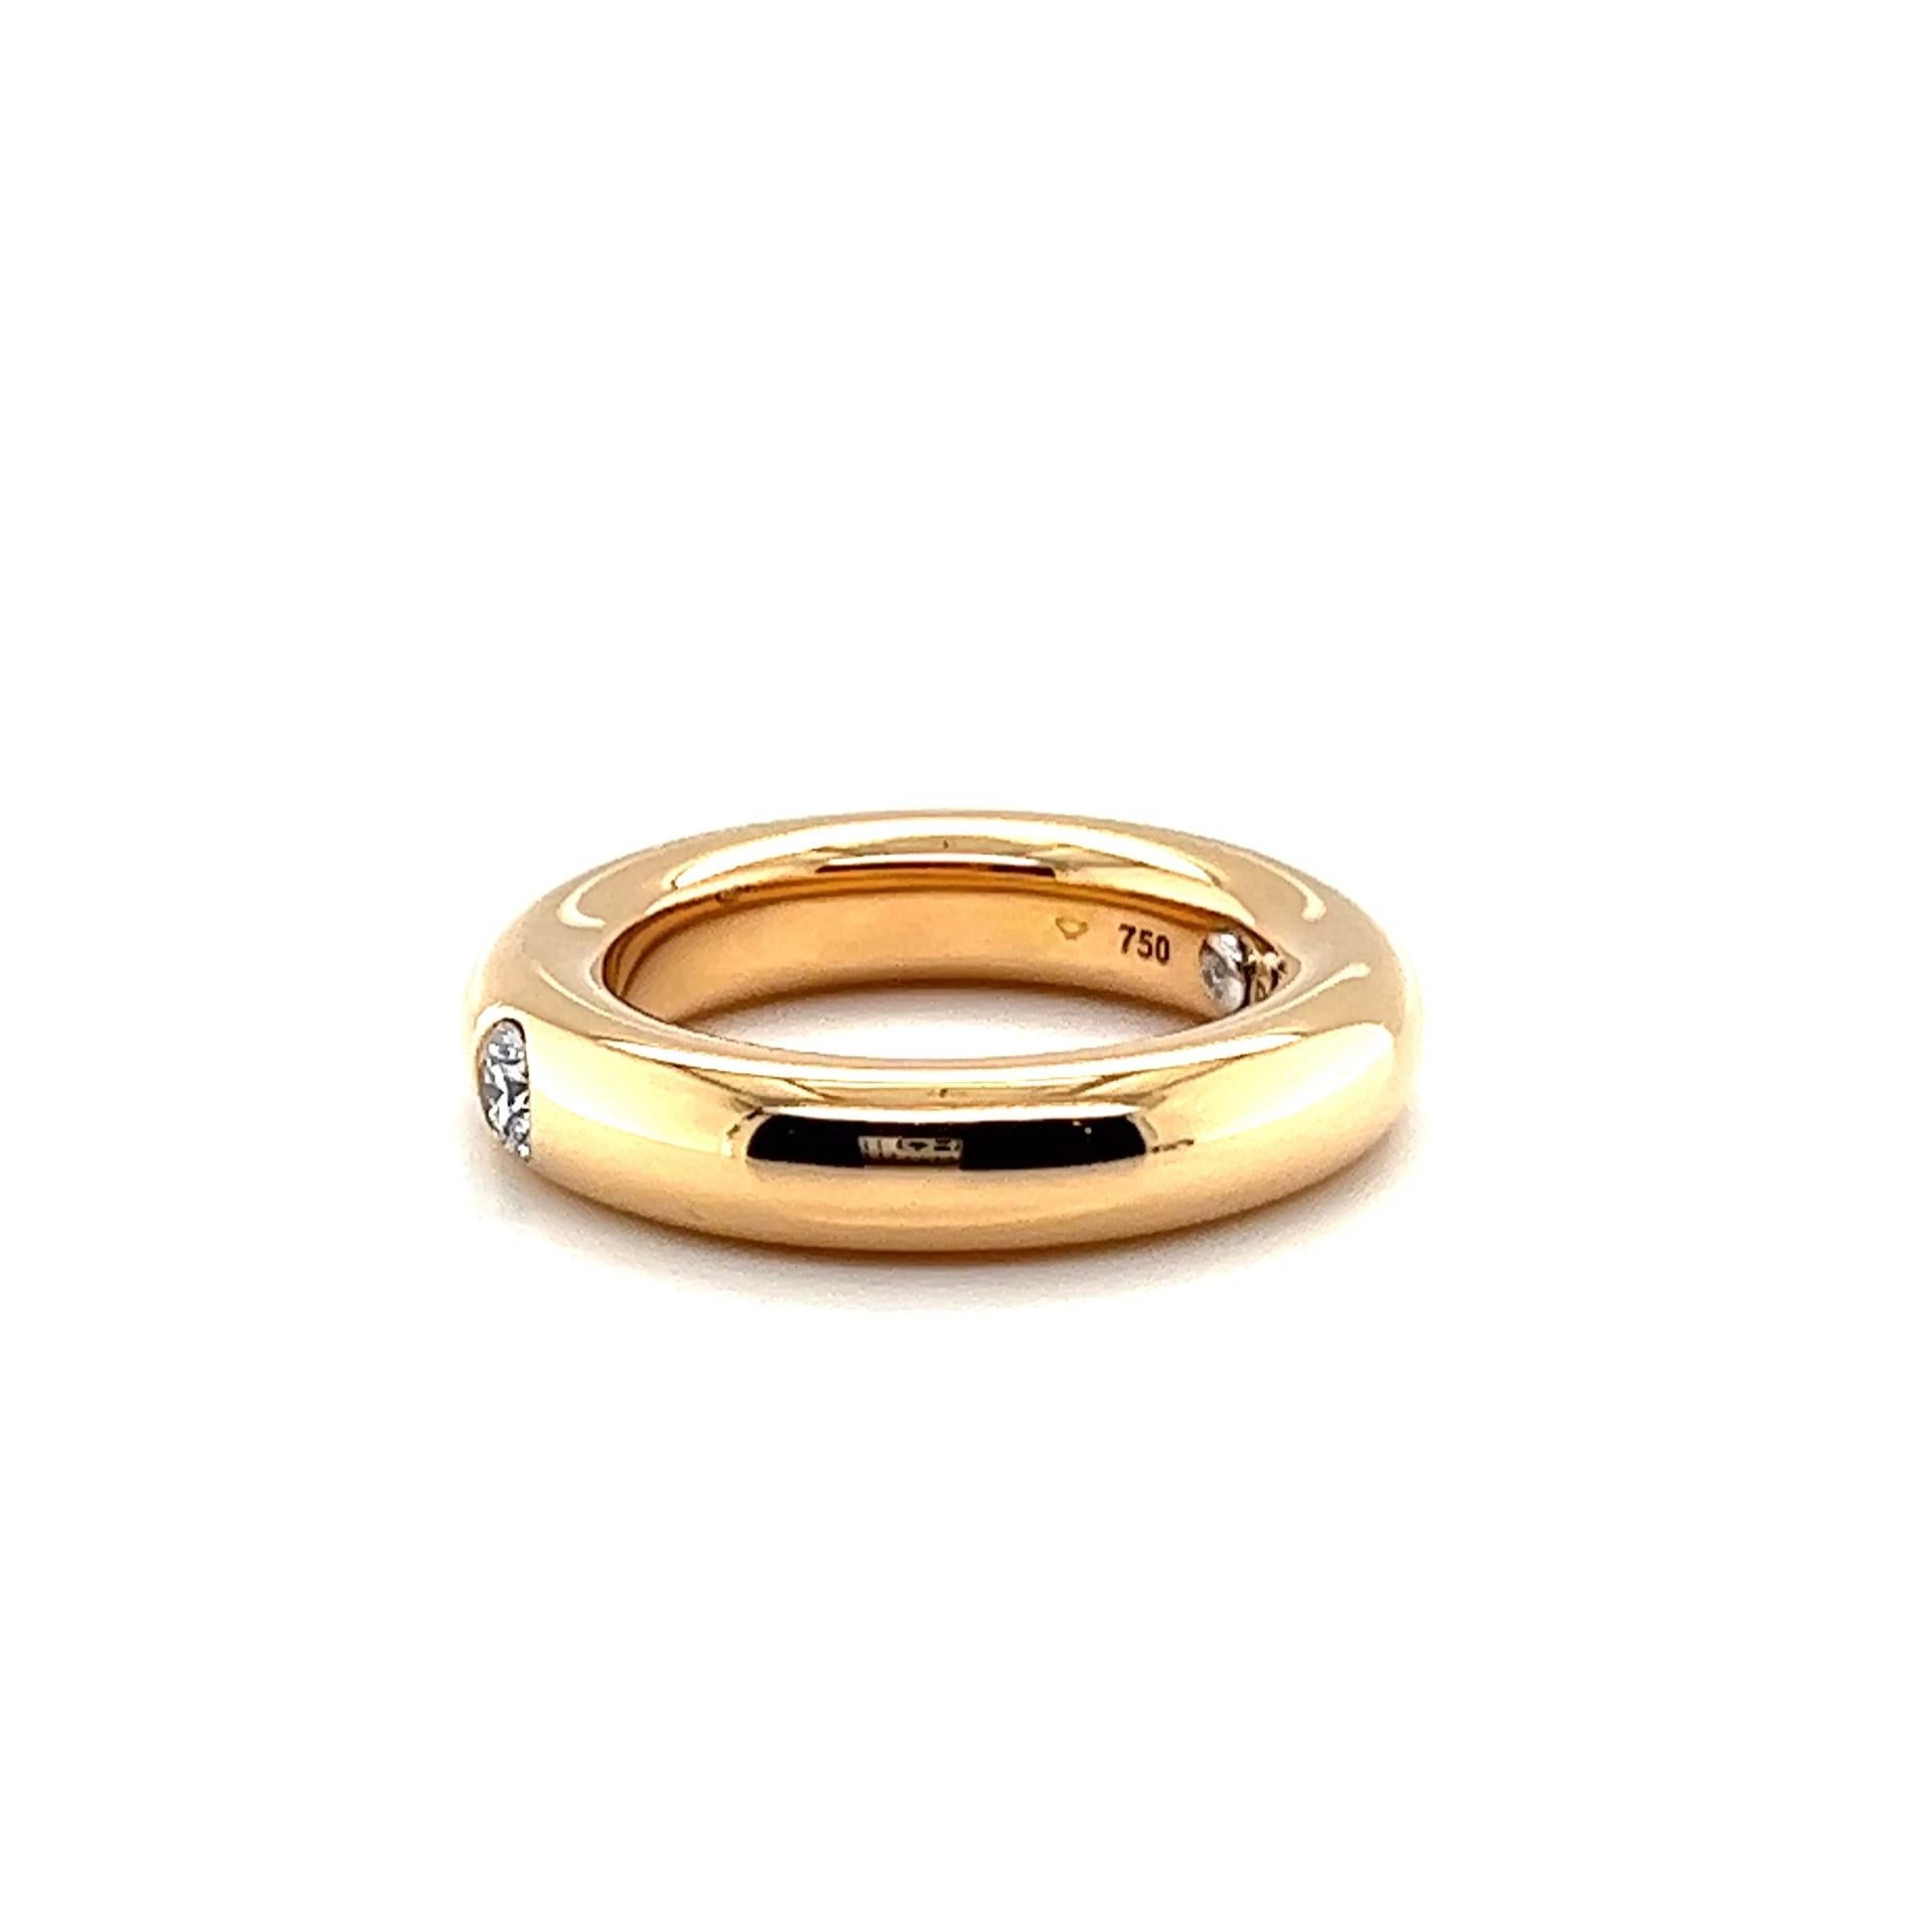 An elegant band ring with diamonds in red gold by German Jeweler Noor. The brand is celebrated for its exceptional artistry and timeless designs. Their unique allure comes from carefully sourced, ethically mined diamonds and understanding of 